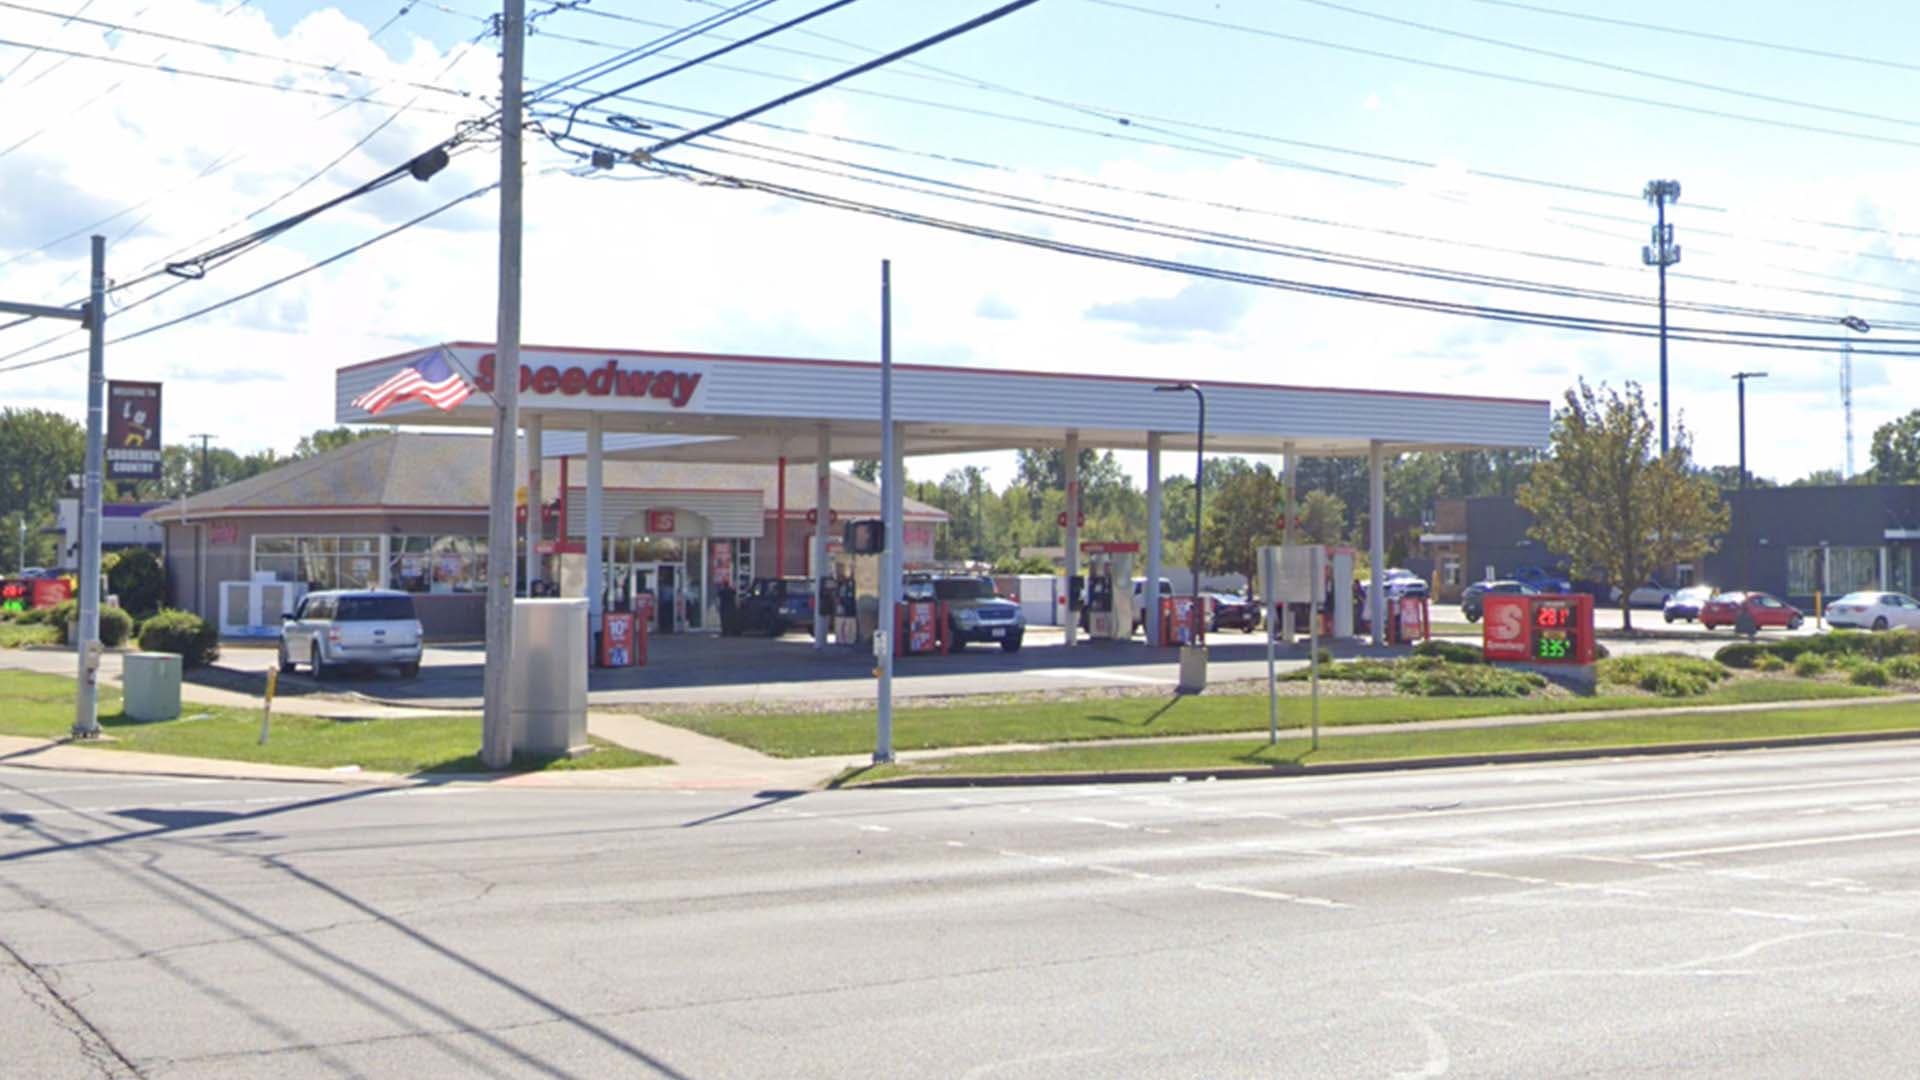 Dozens of Cars Need Repairs After Ohio Gas Station Sells Tainted Fuel